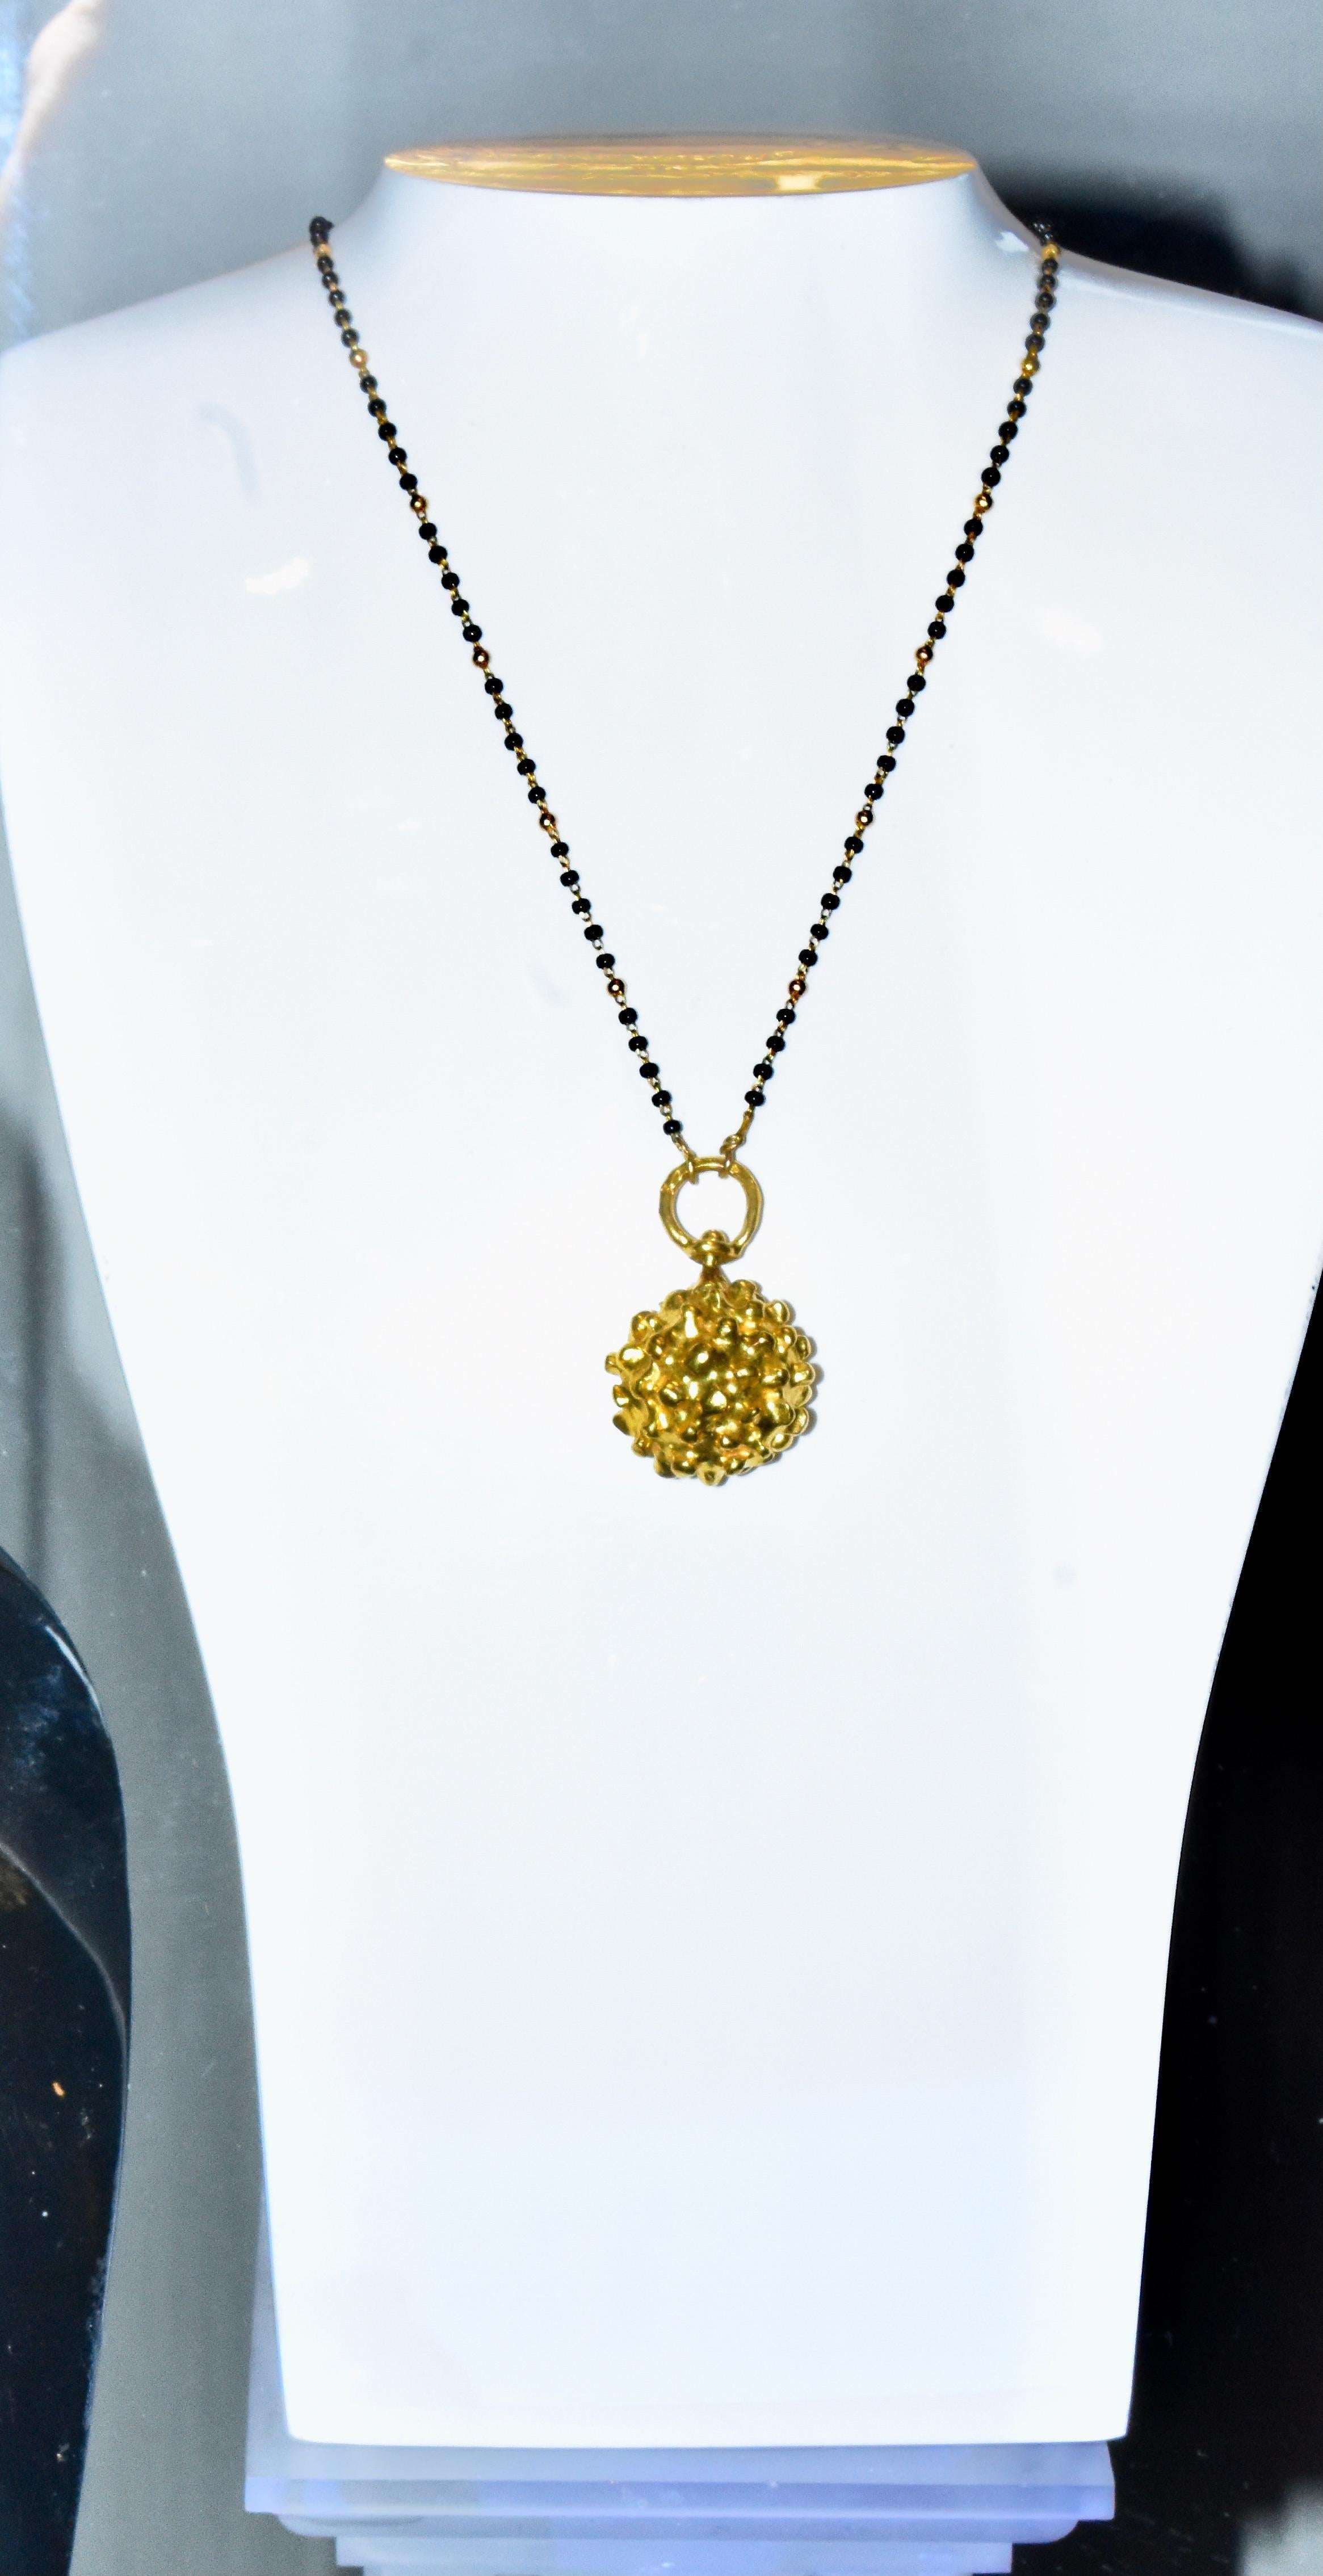 Jean Mahie Etruscan large ball pendant  in 22K yellow gold is very easy to wear and distinctive. Shown here on a contemporary gold chain  with onyx small balls which has a length of 16.5 inches (this chain is not by Jean Mahie). The Etruscan sphere